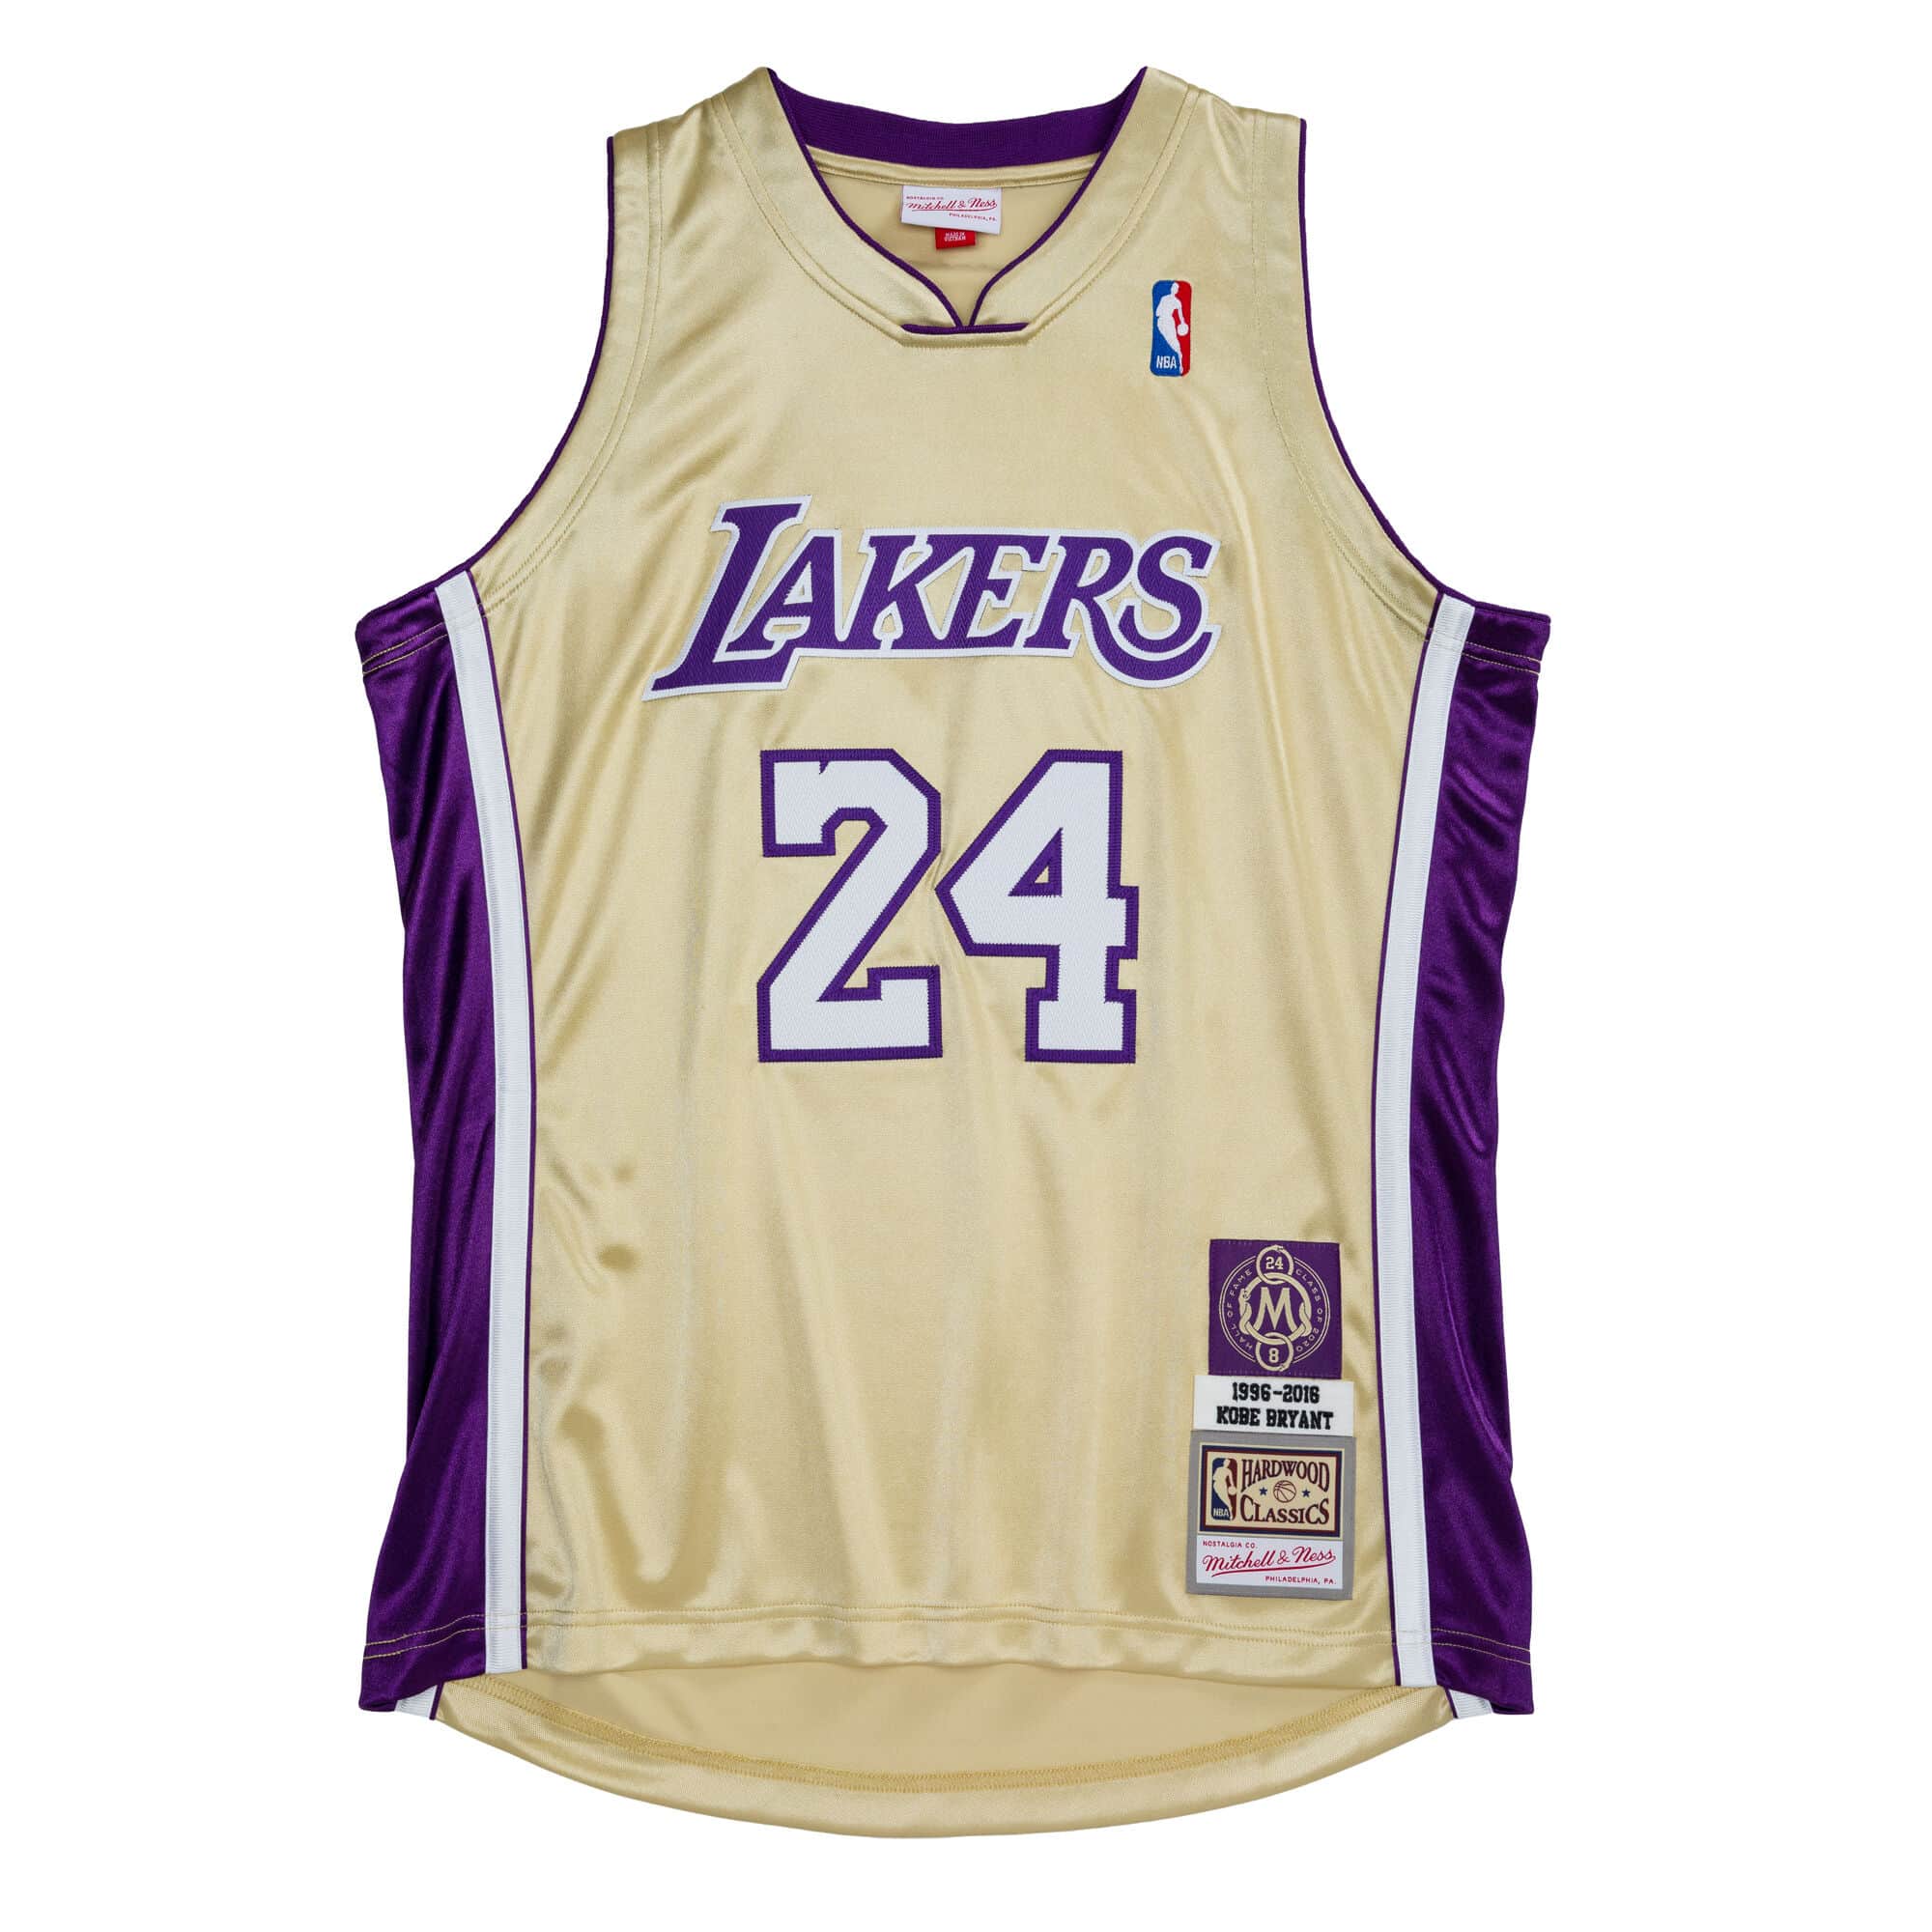 Mitchell & Ness Lakers 96'-97' Kobe Bryant Jersey for Sale in